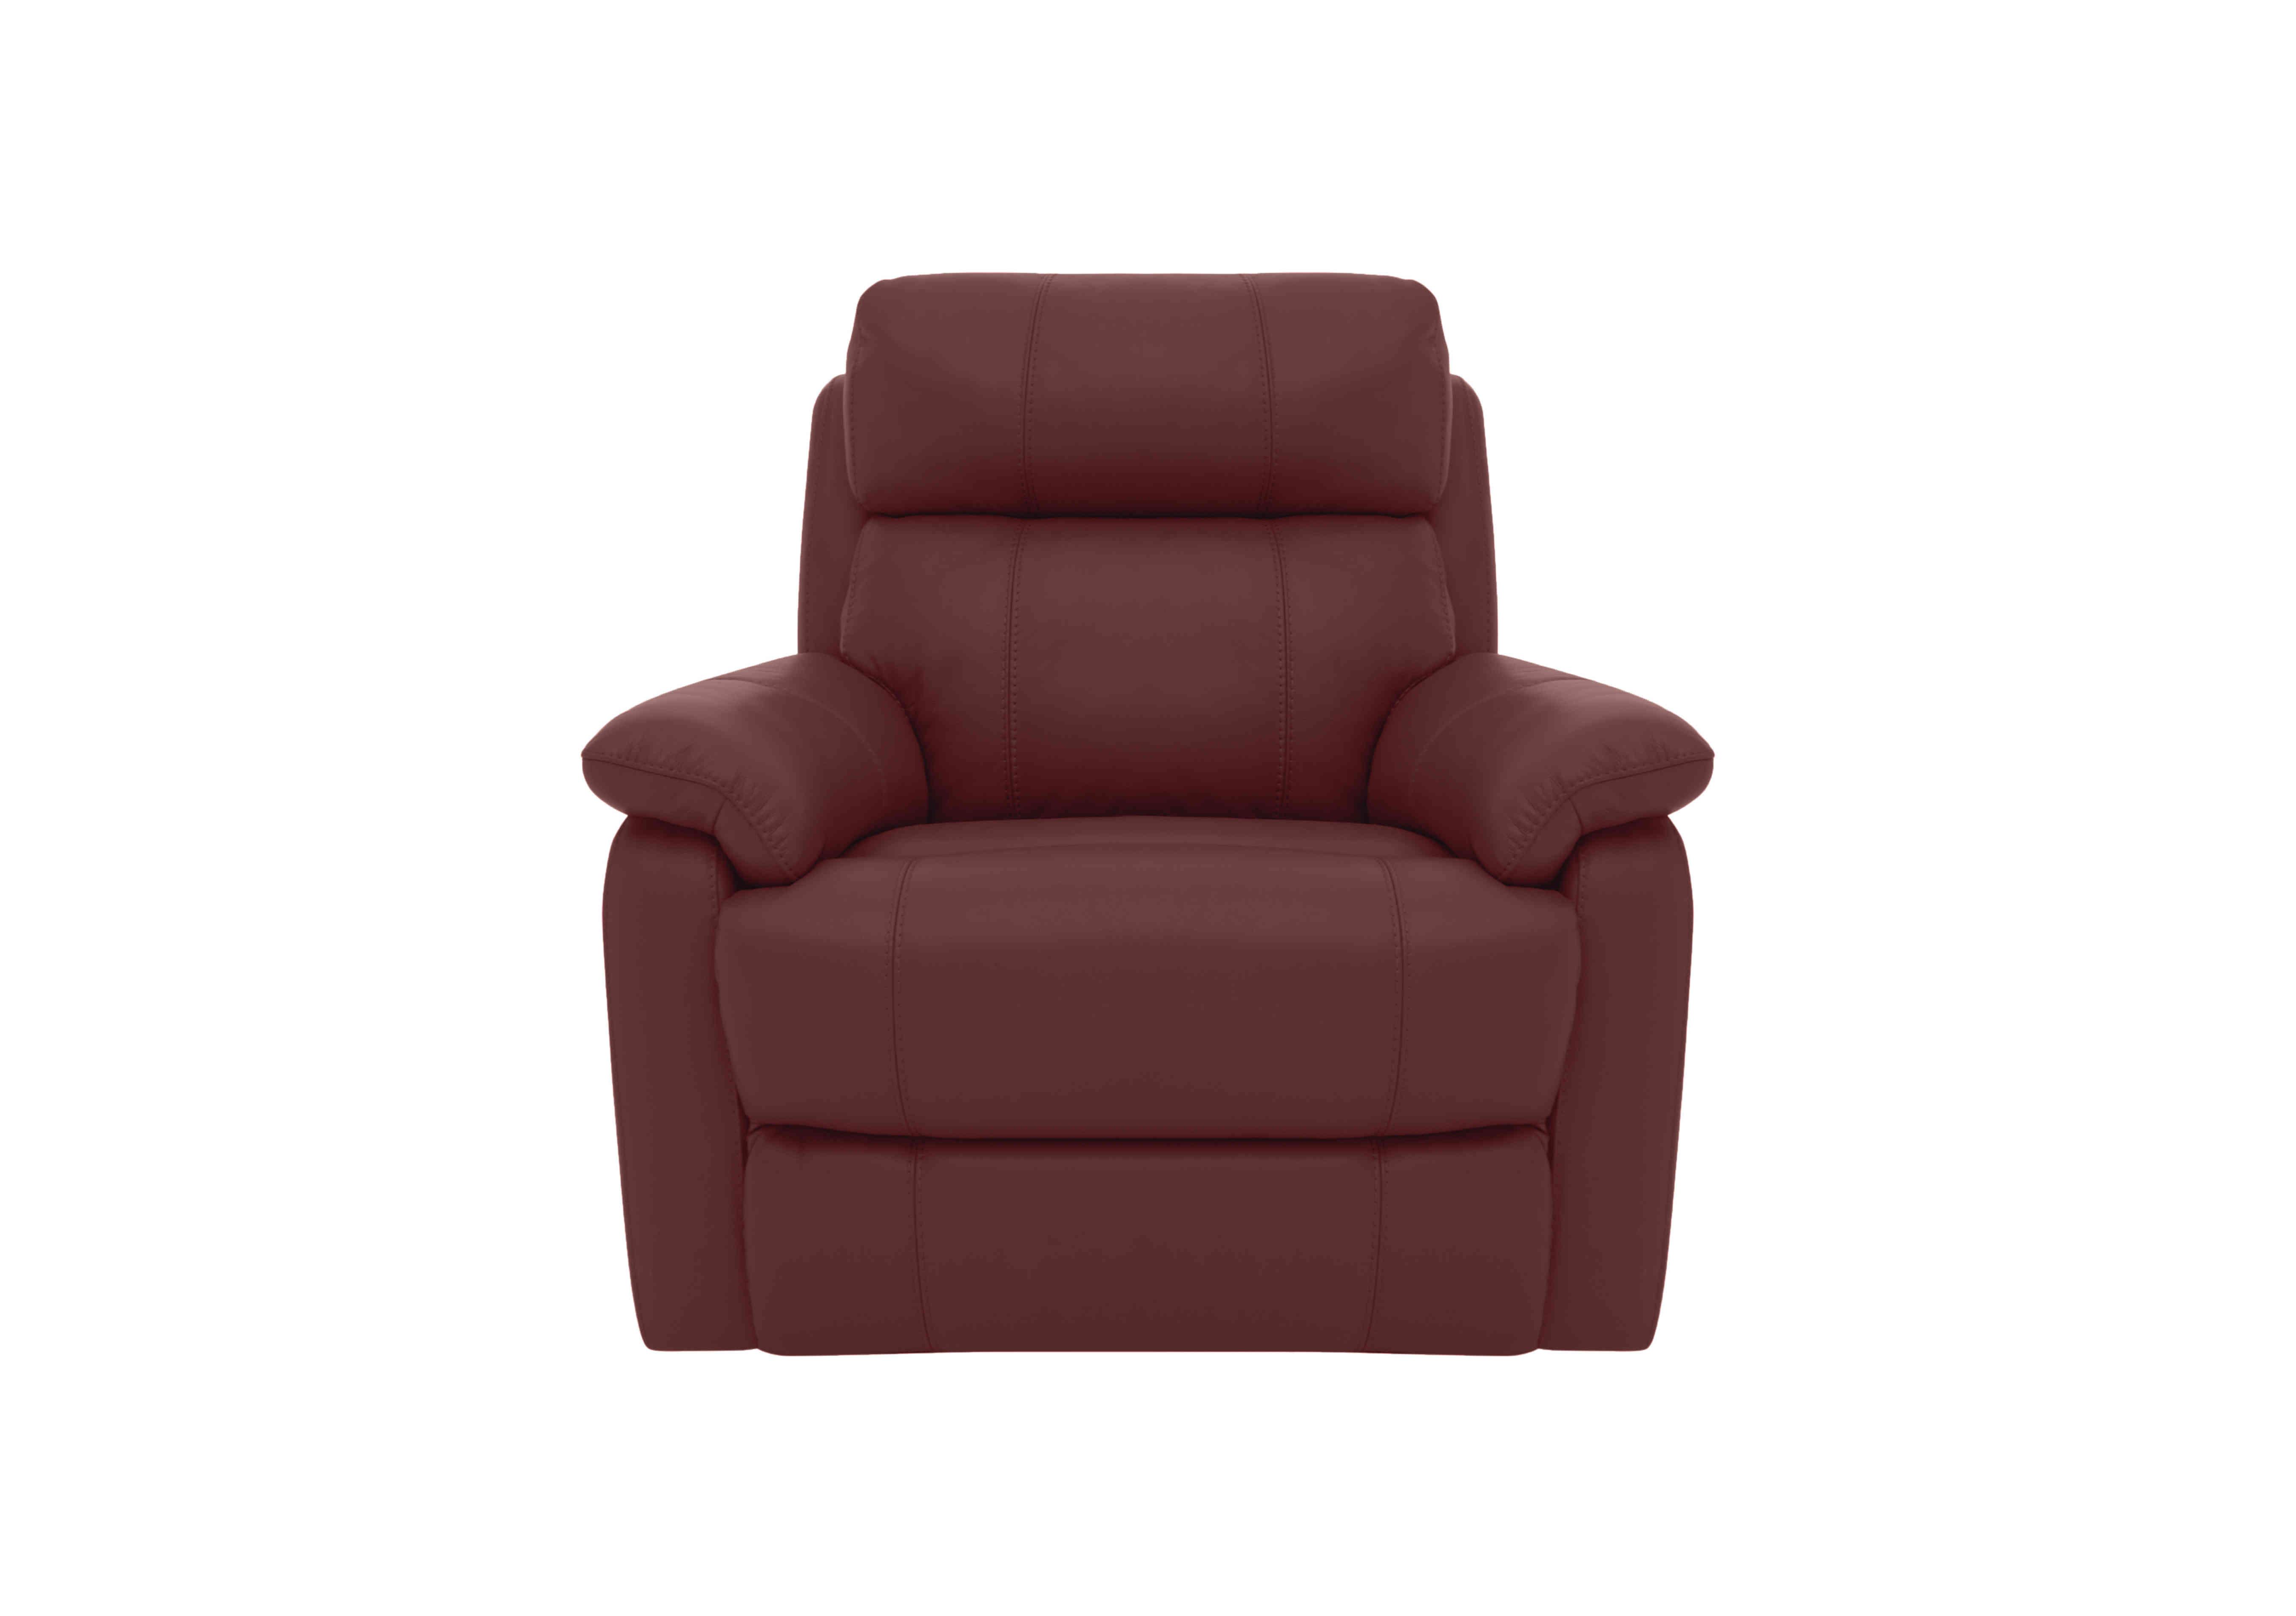 Relax Station Komodo Leather Power Armchair in Bv-035c Deep Red on Furniture Village